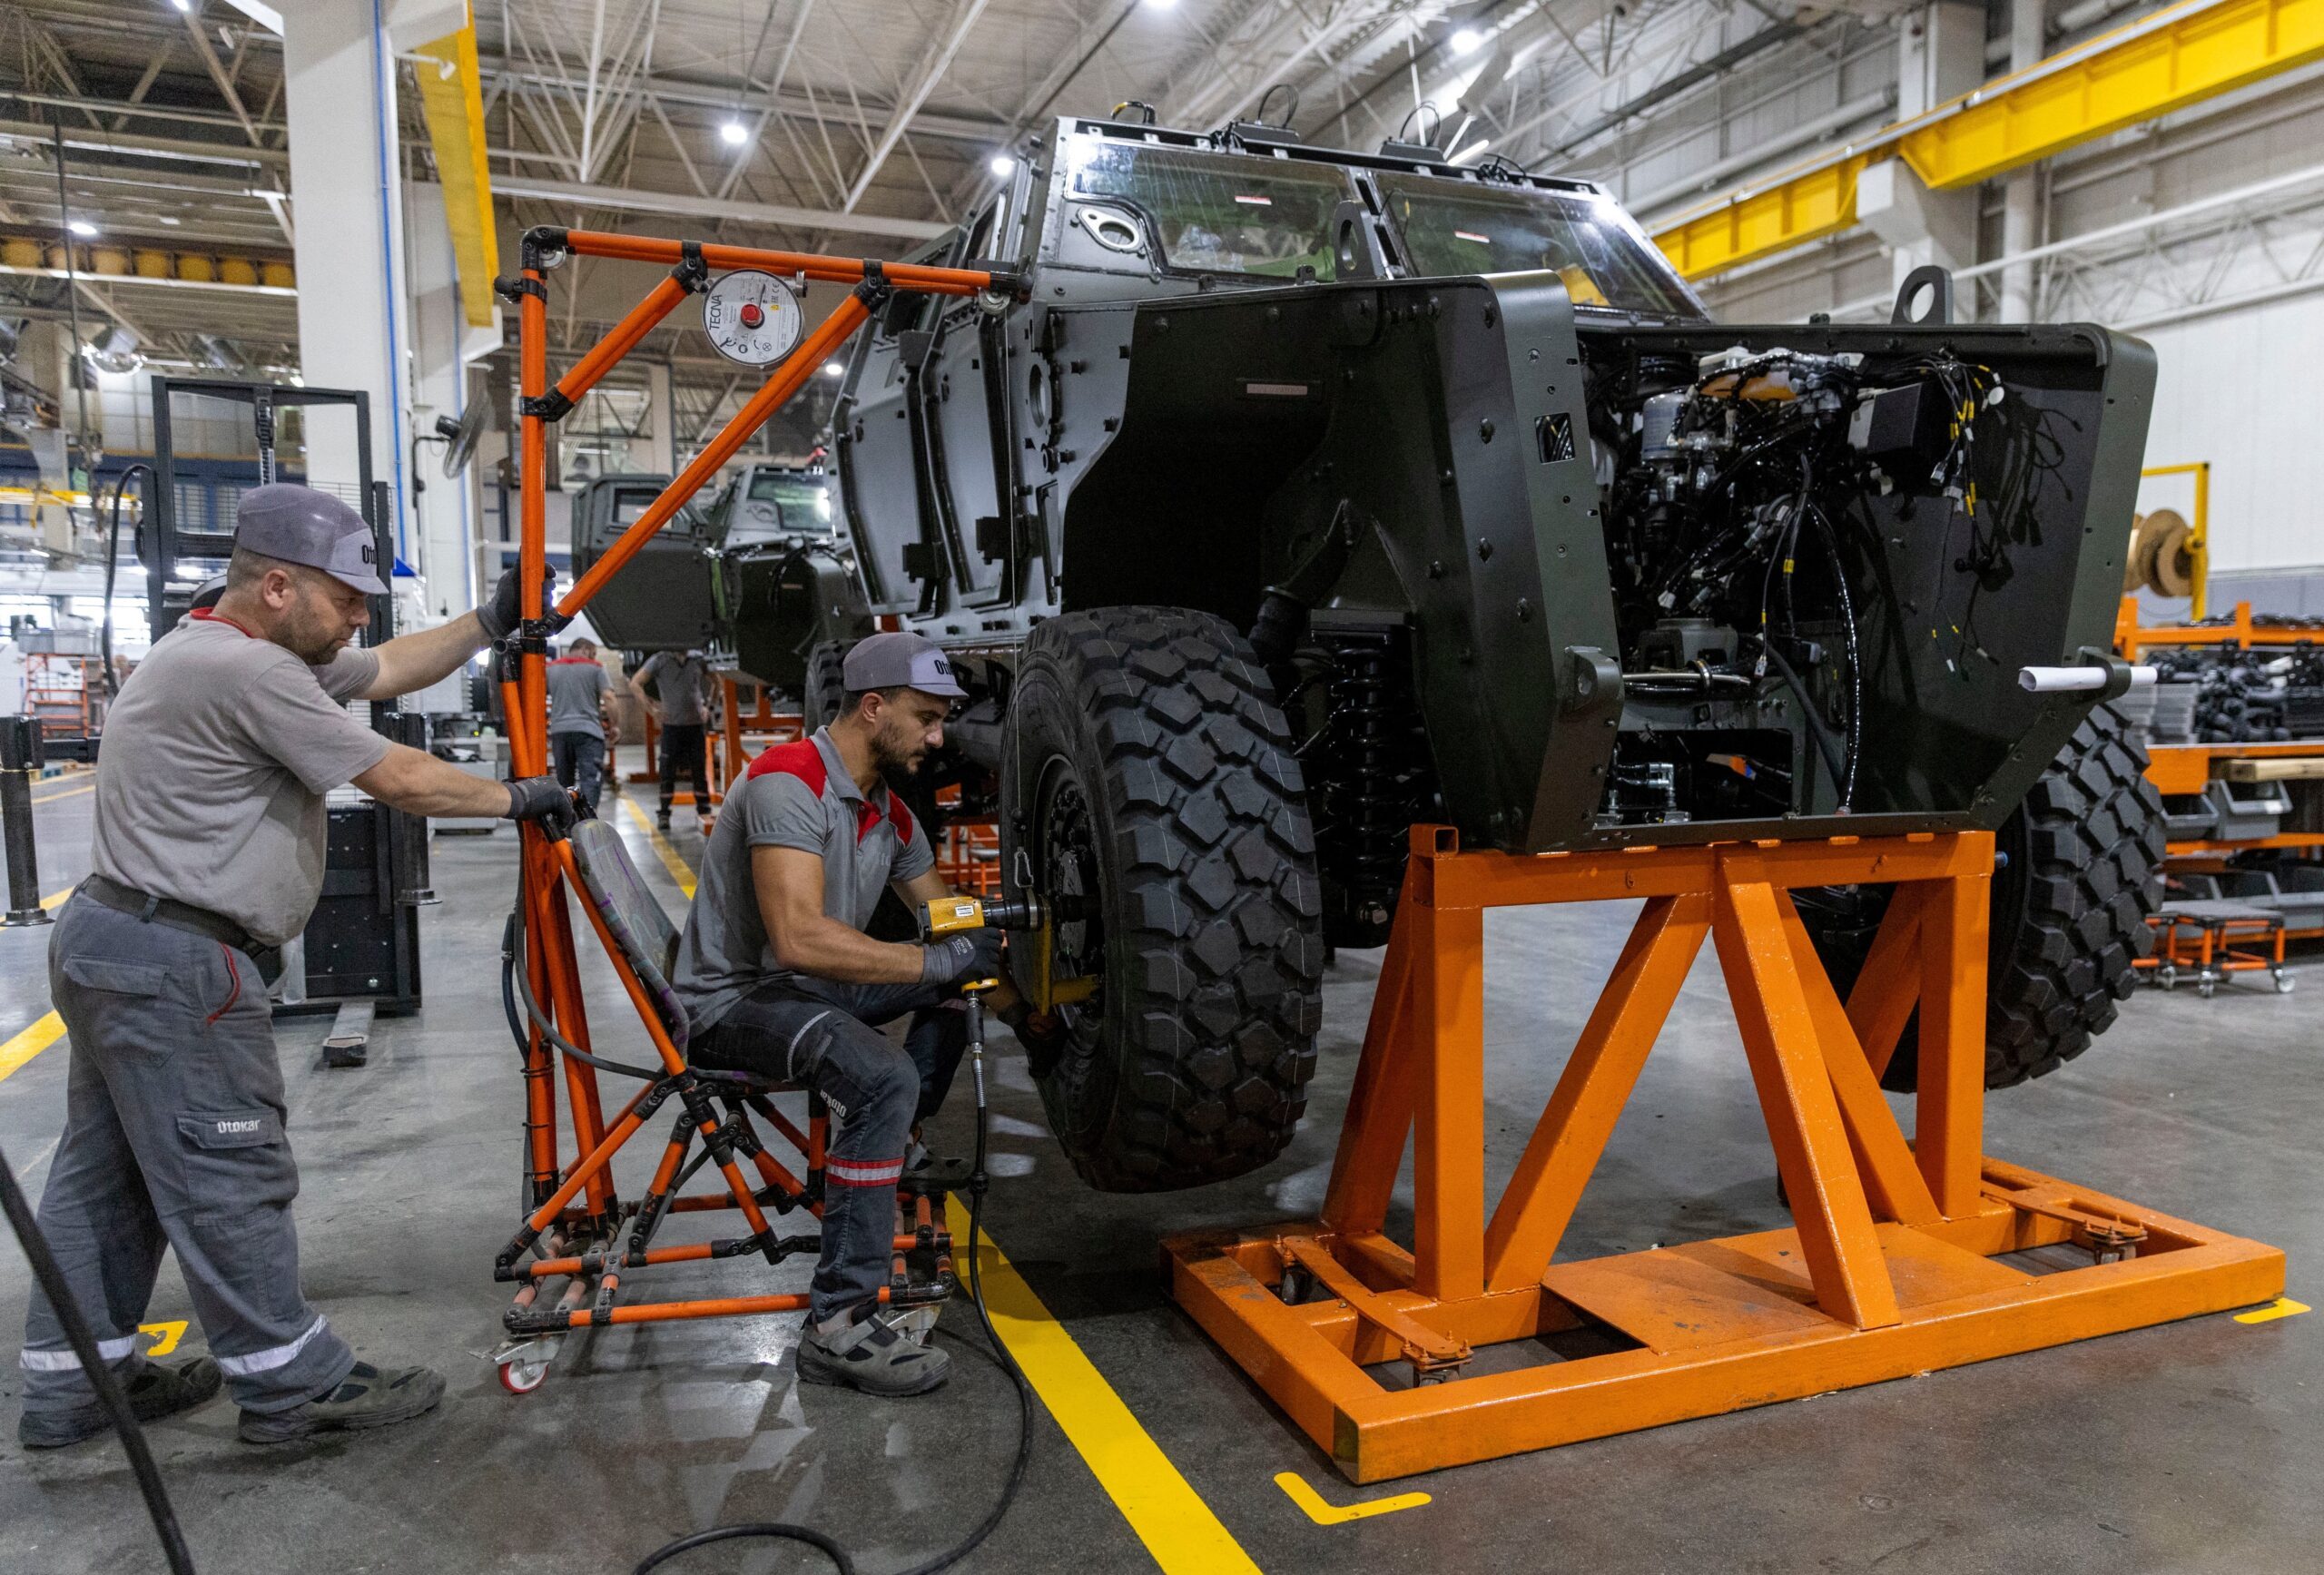 Technicians work on a military vehicle at the Otokar factory in Arifiye. Industrial production fell sharply in April